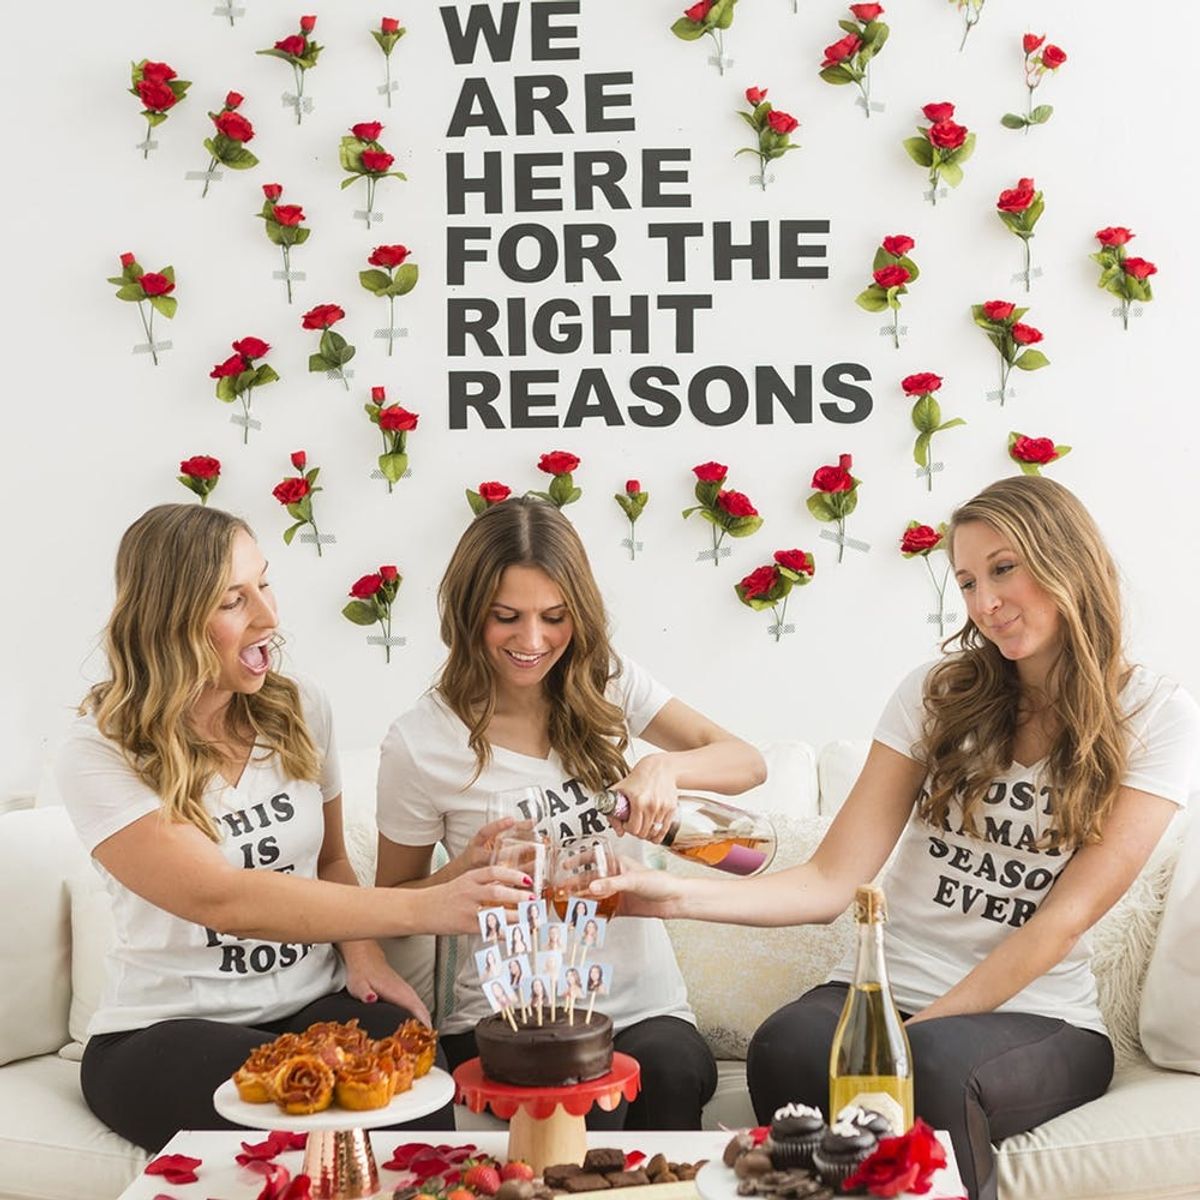 3 DIYs to Make for the Most Dramatic Bachelor Viewing Party Ever